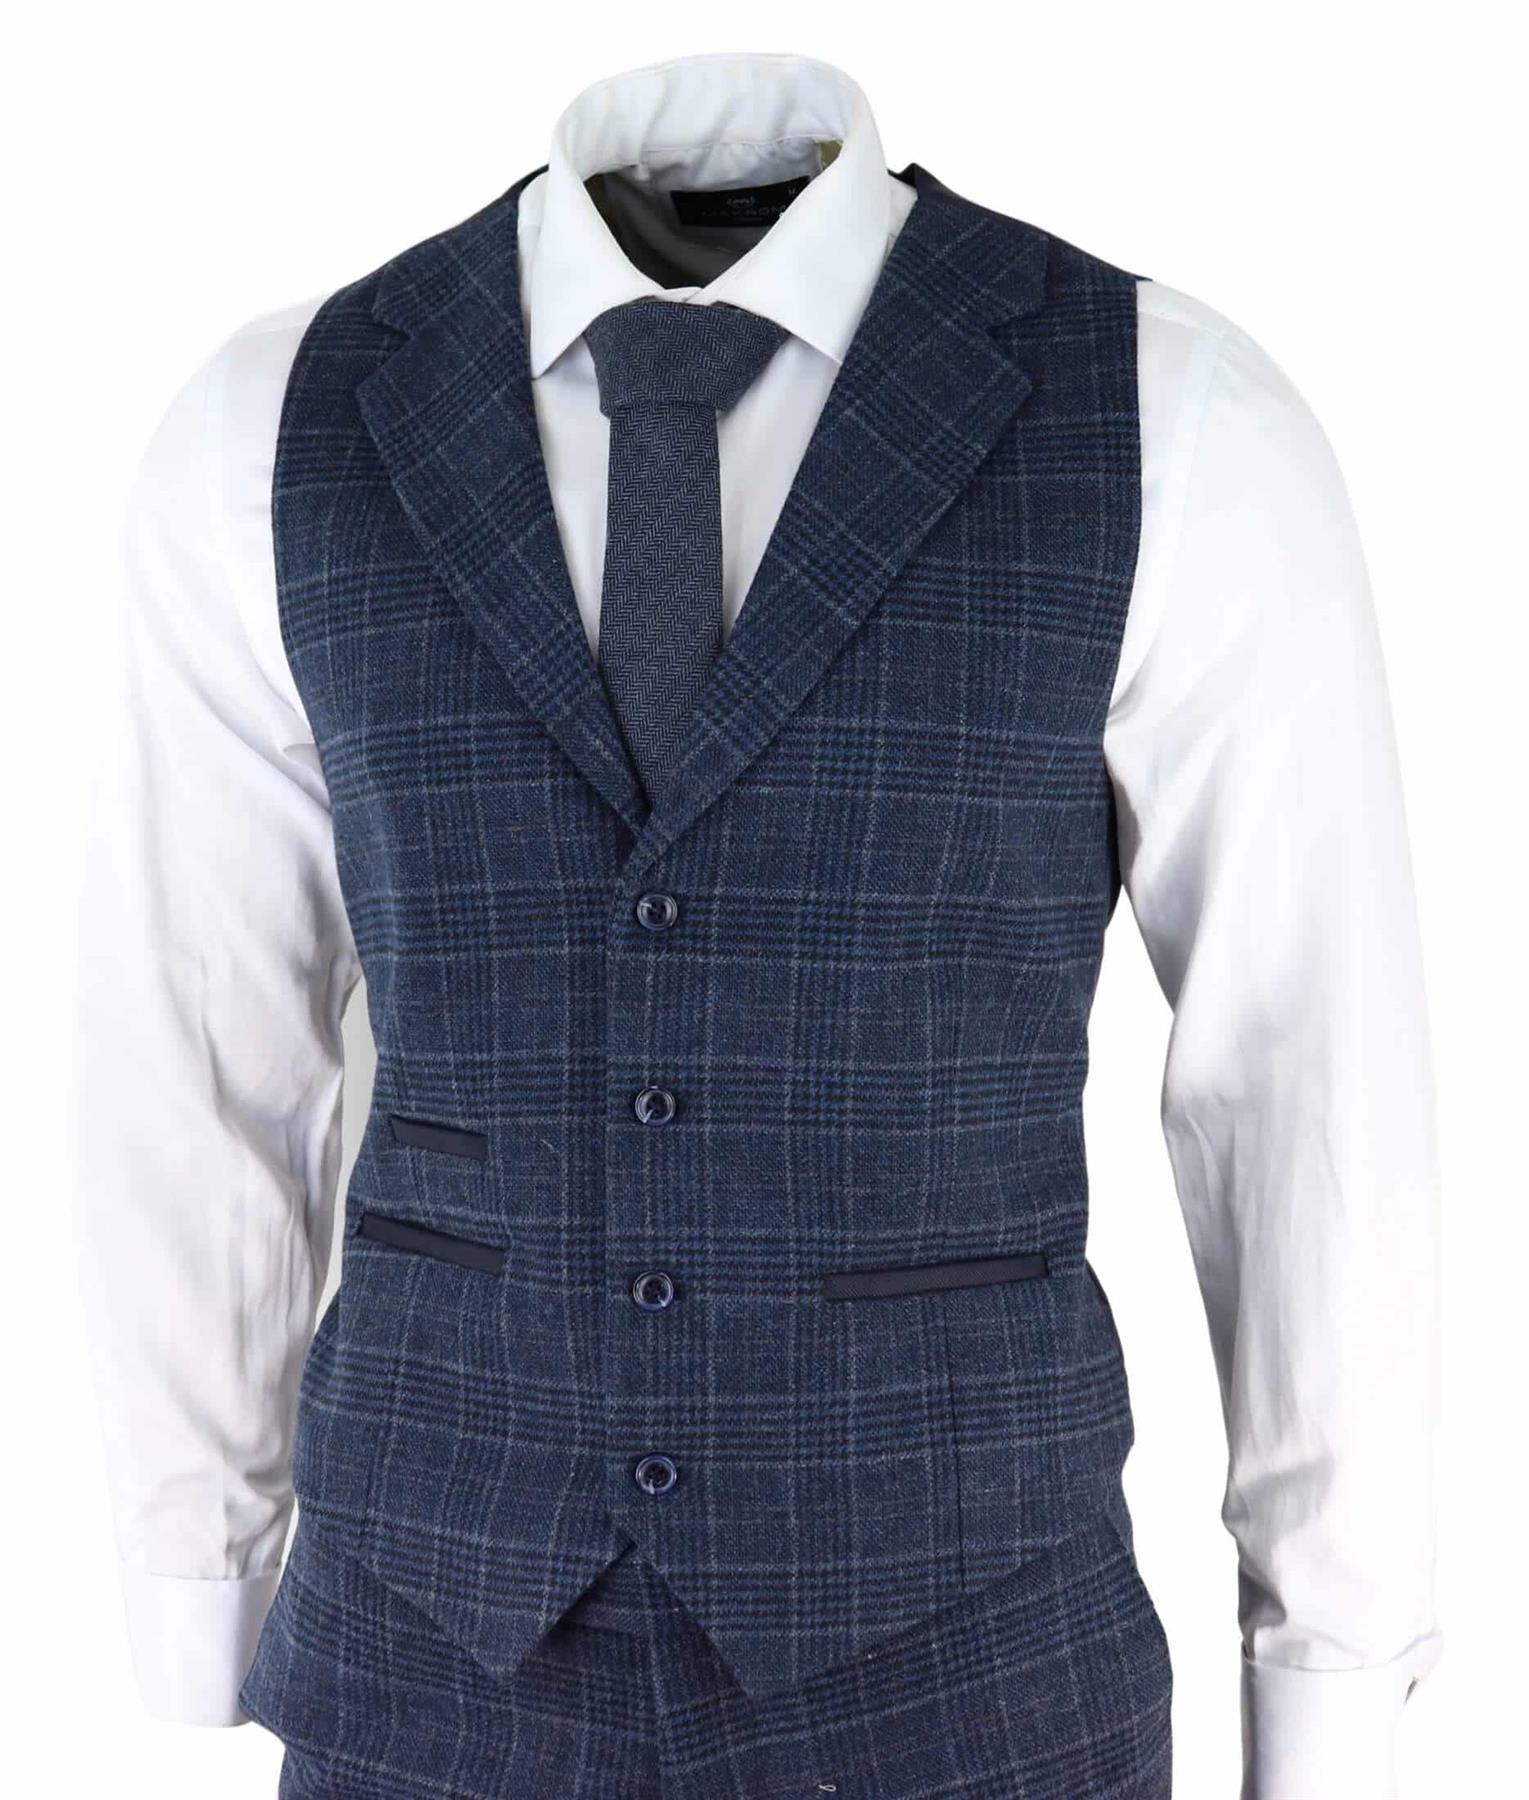 Mens Blue Check 3 Piece Tweed Suit Peaky Blinders 1920s Gatsby Tailored Fit